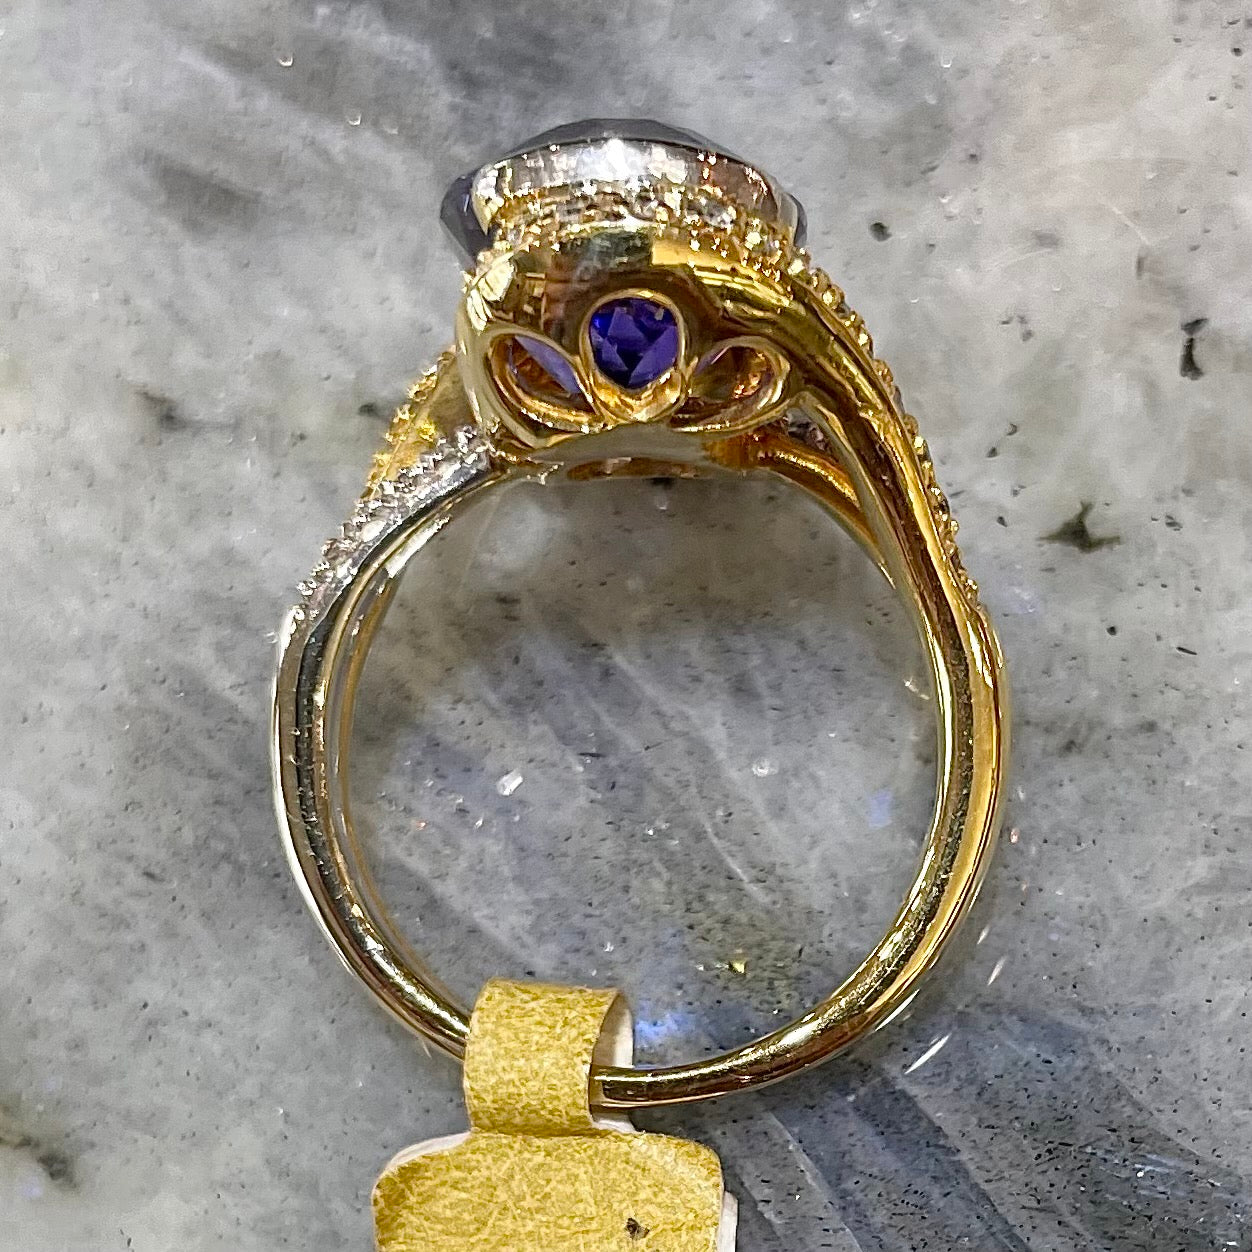 A large, oval cut blue tanzanite set in a two tone yellow and white gold diamond ring.